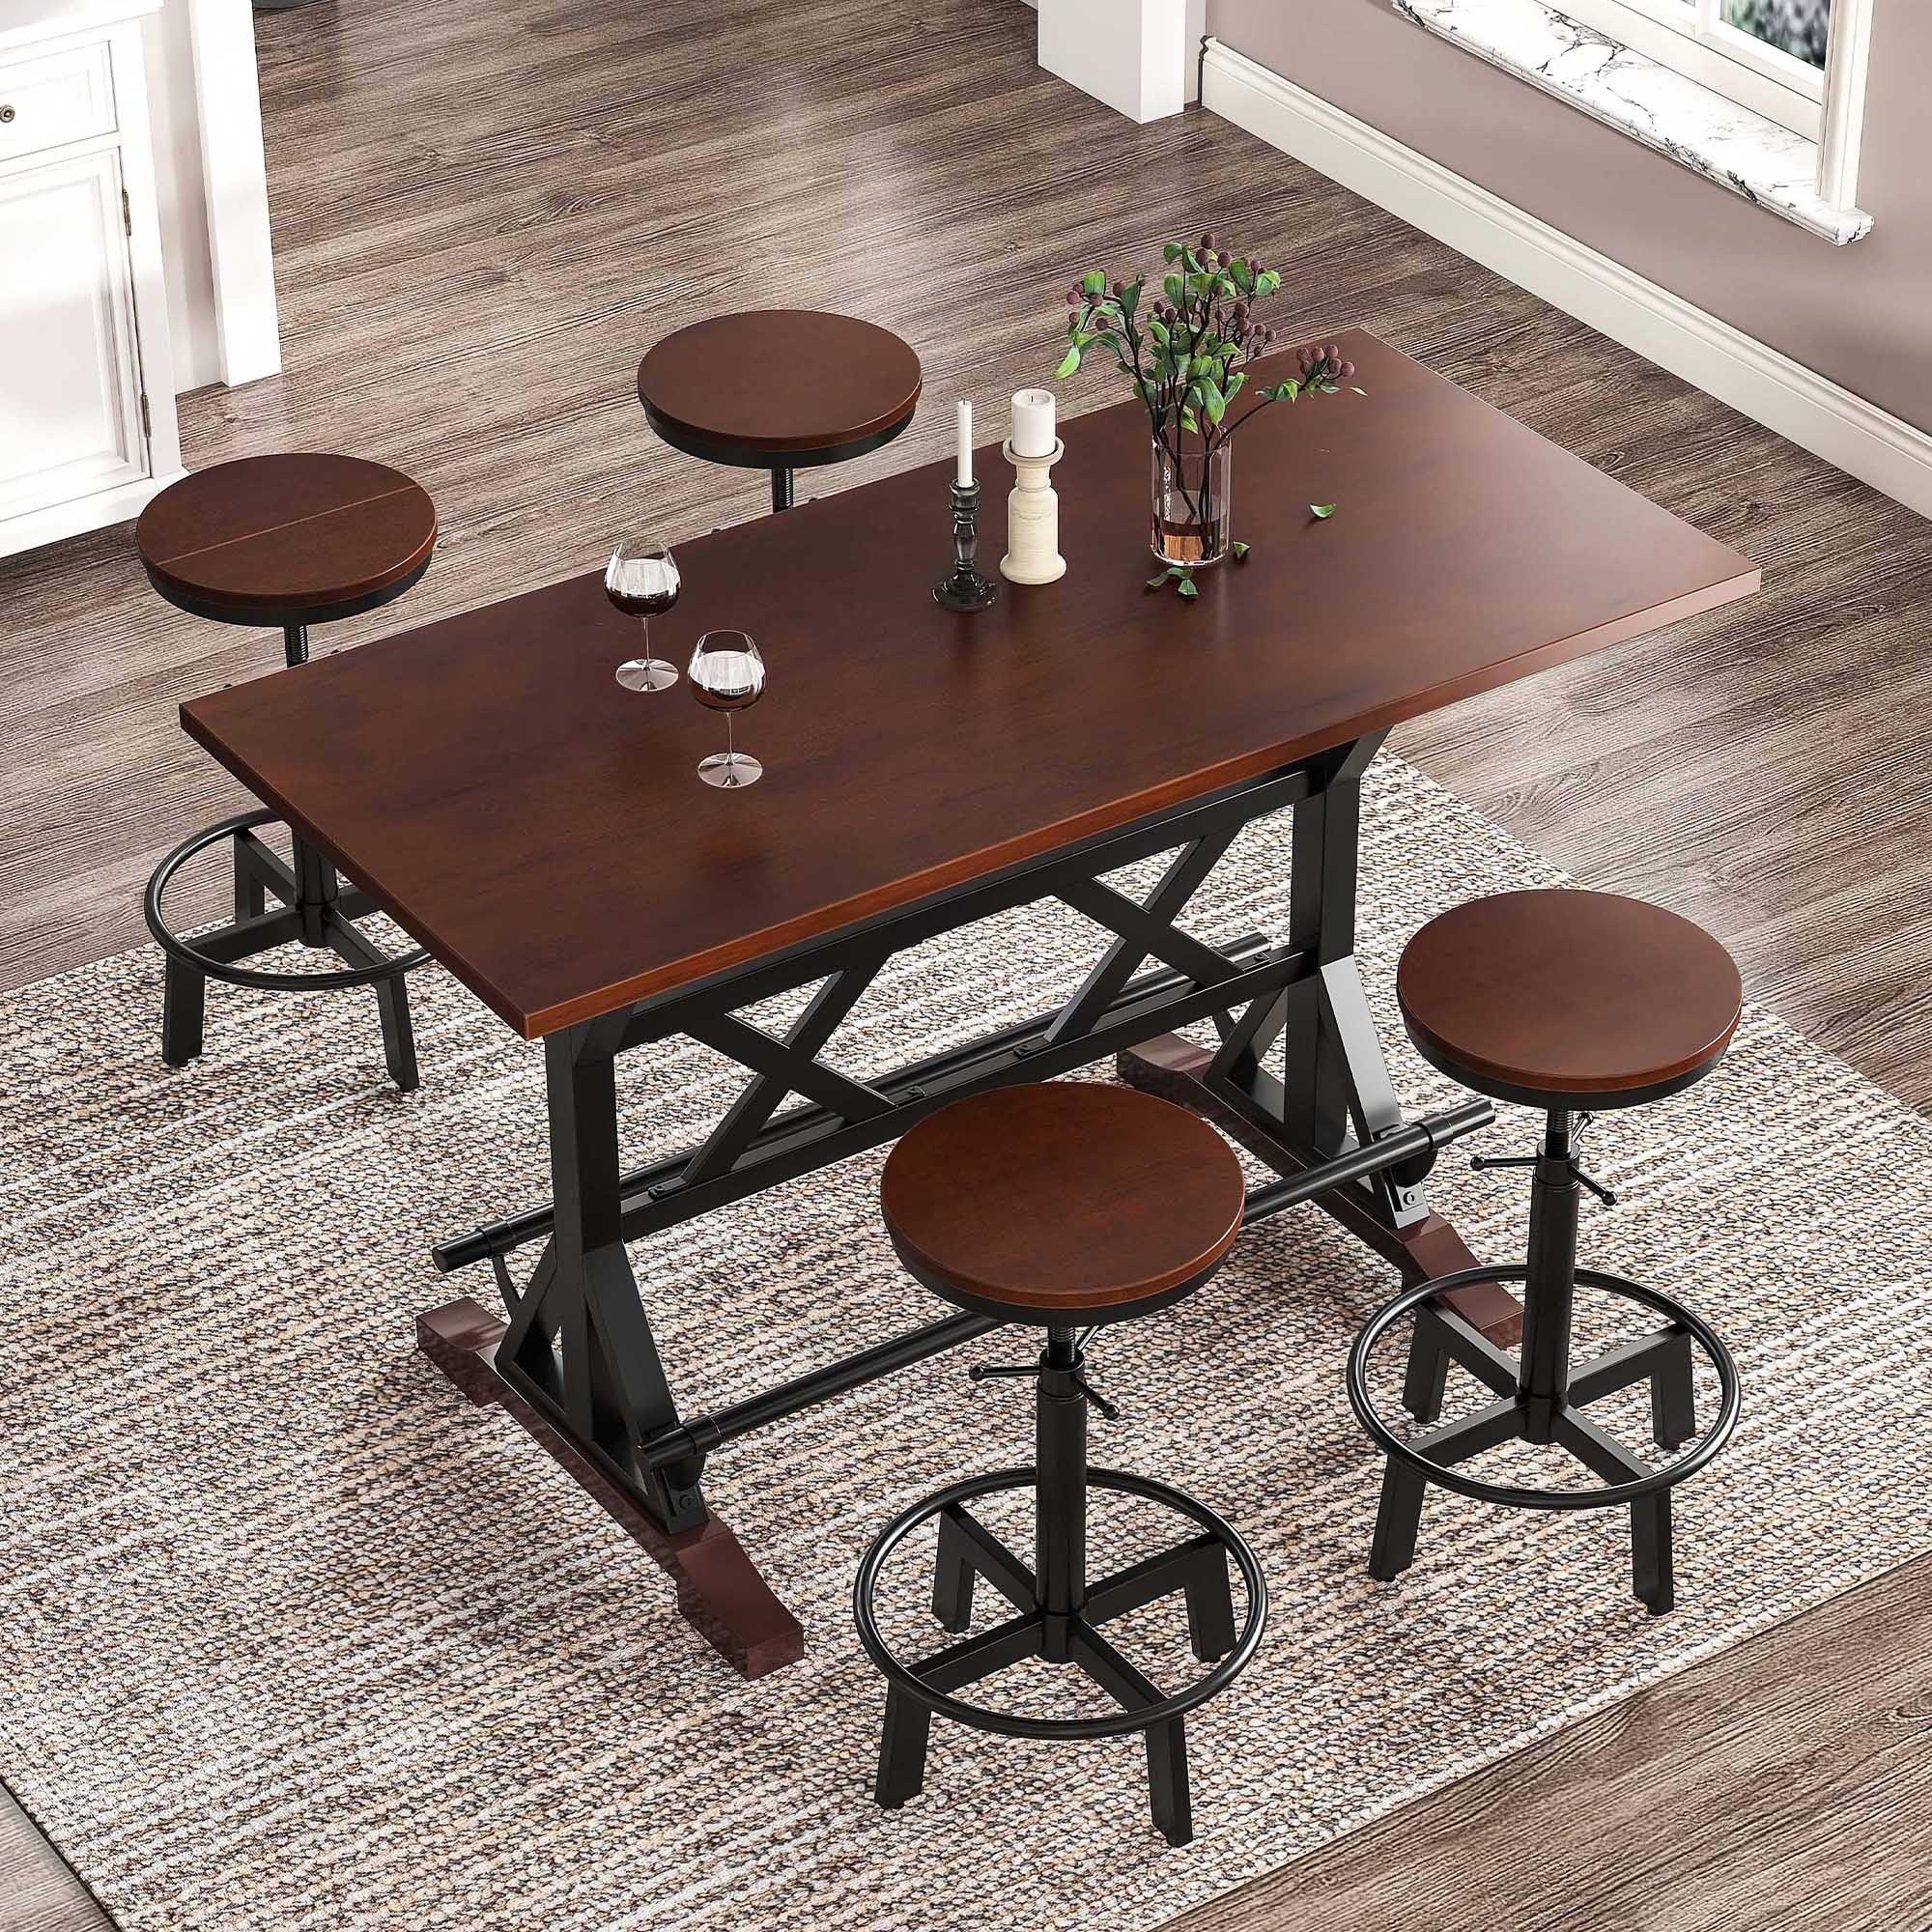 🆓🚛 5-Piece Dining Set, 59" Wooden Bar Table With Stabilizing Base, 4 Rustic Brown Industrial Adjustable Height Chairs